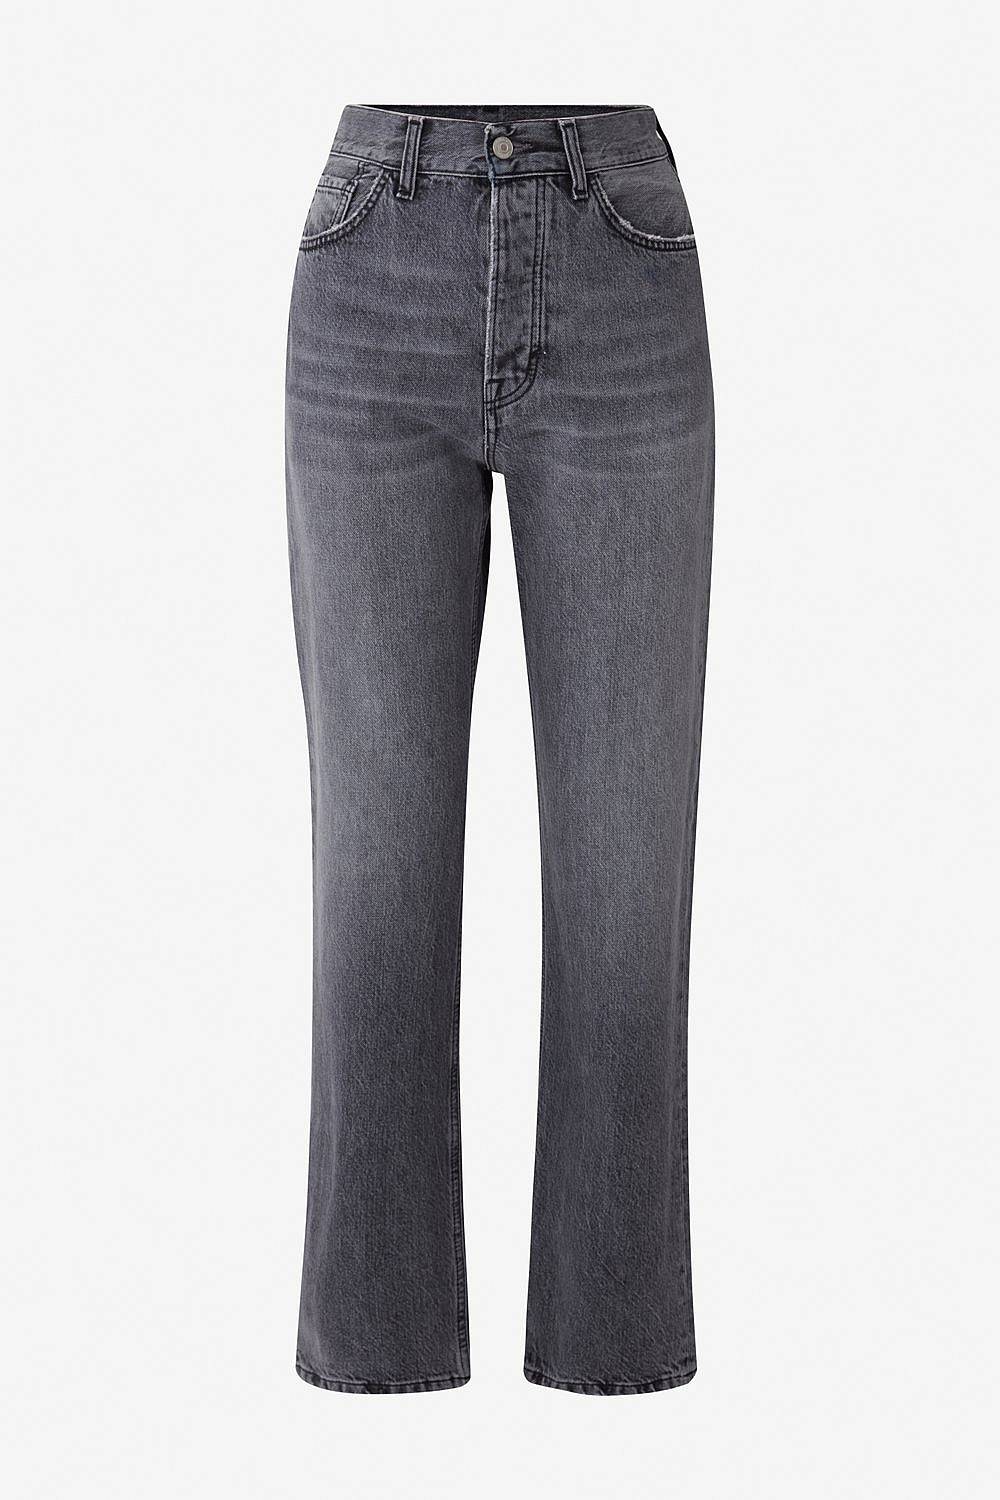 The 8 Best Loose-Fitting Jeans for Women